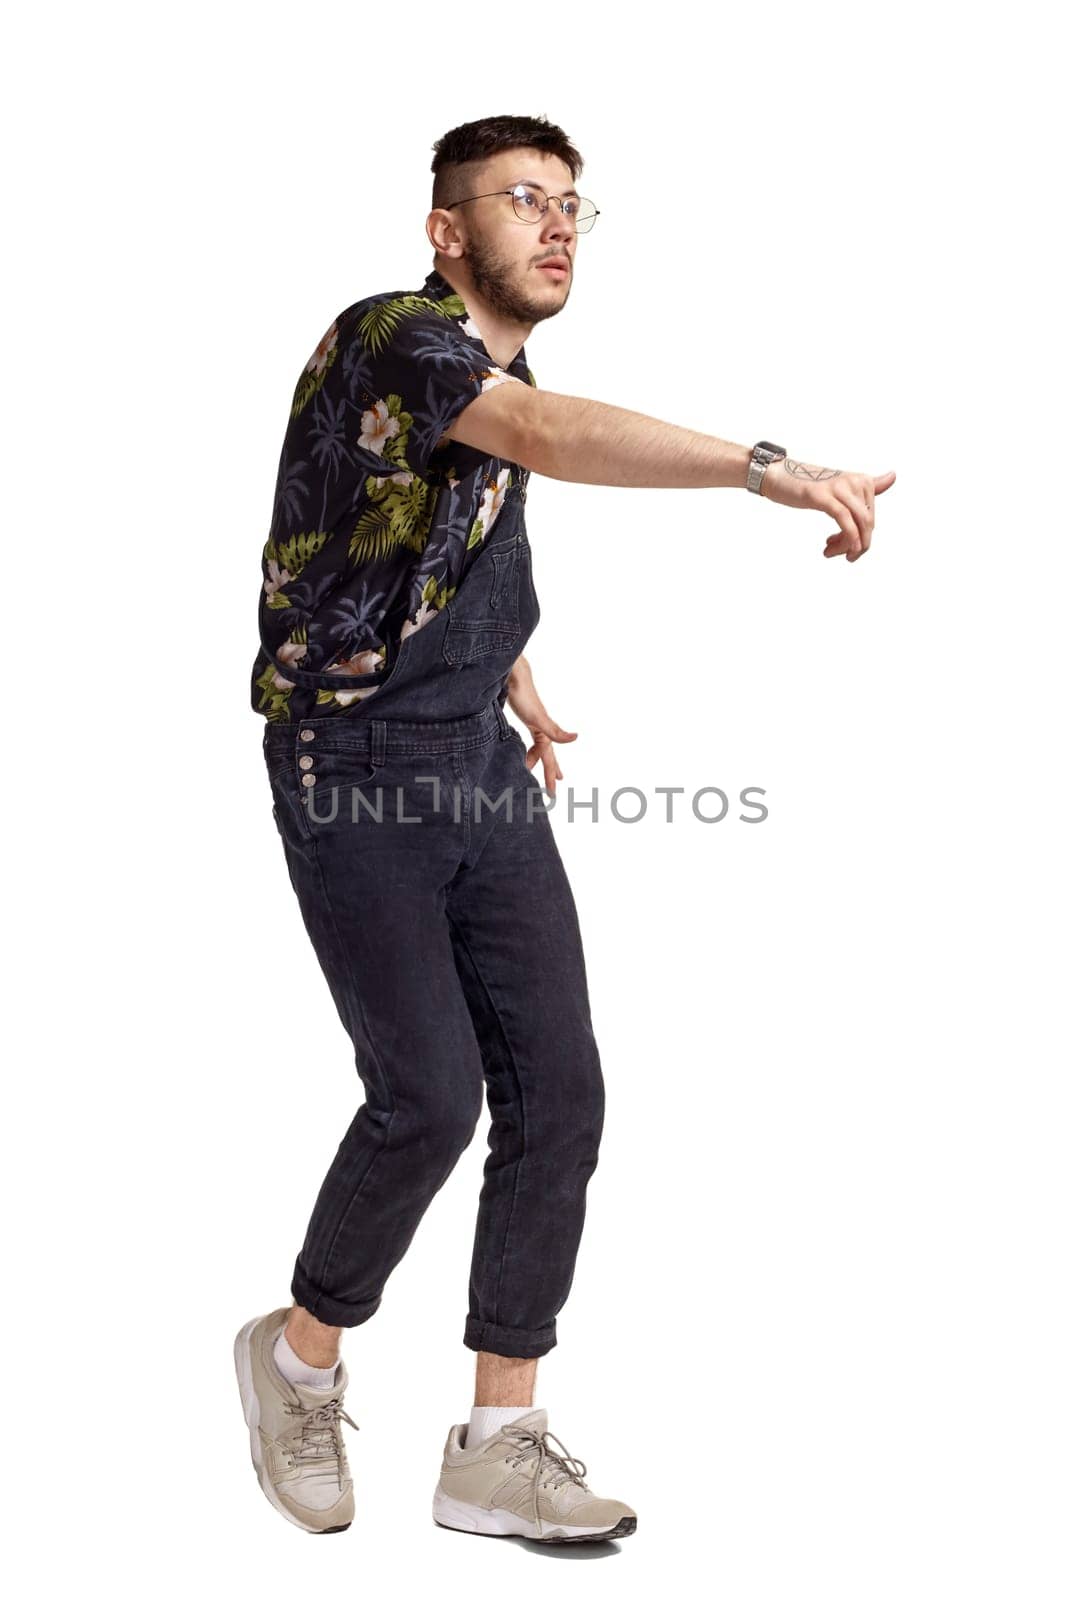 Full-length portrait of an athletic male in glasses, black jumpsuit, colorful t-shirt and gray sneakers fooling around in studio. Indoor photo of a man dancing isolated on white background. Music and imagination. Copy space.